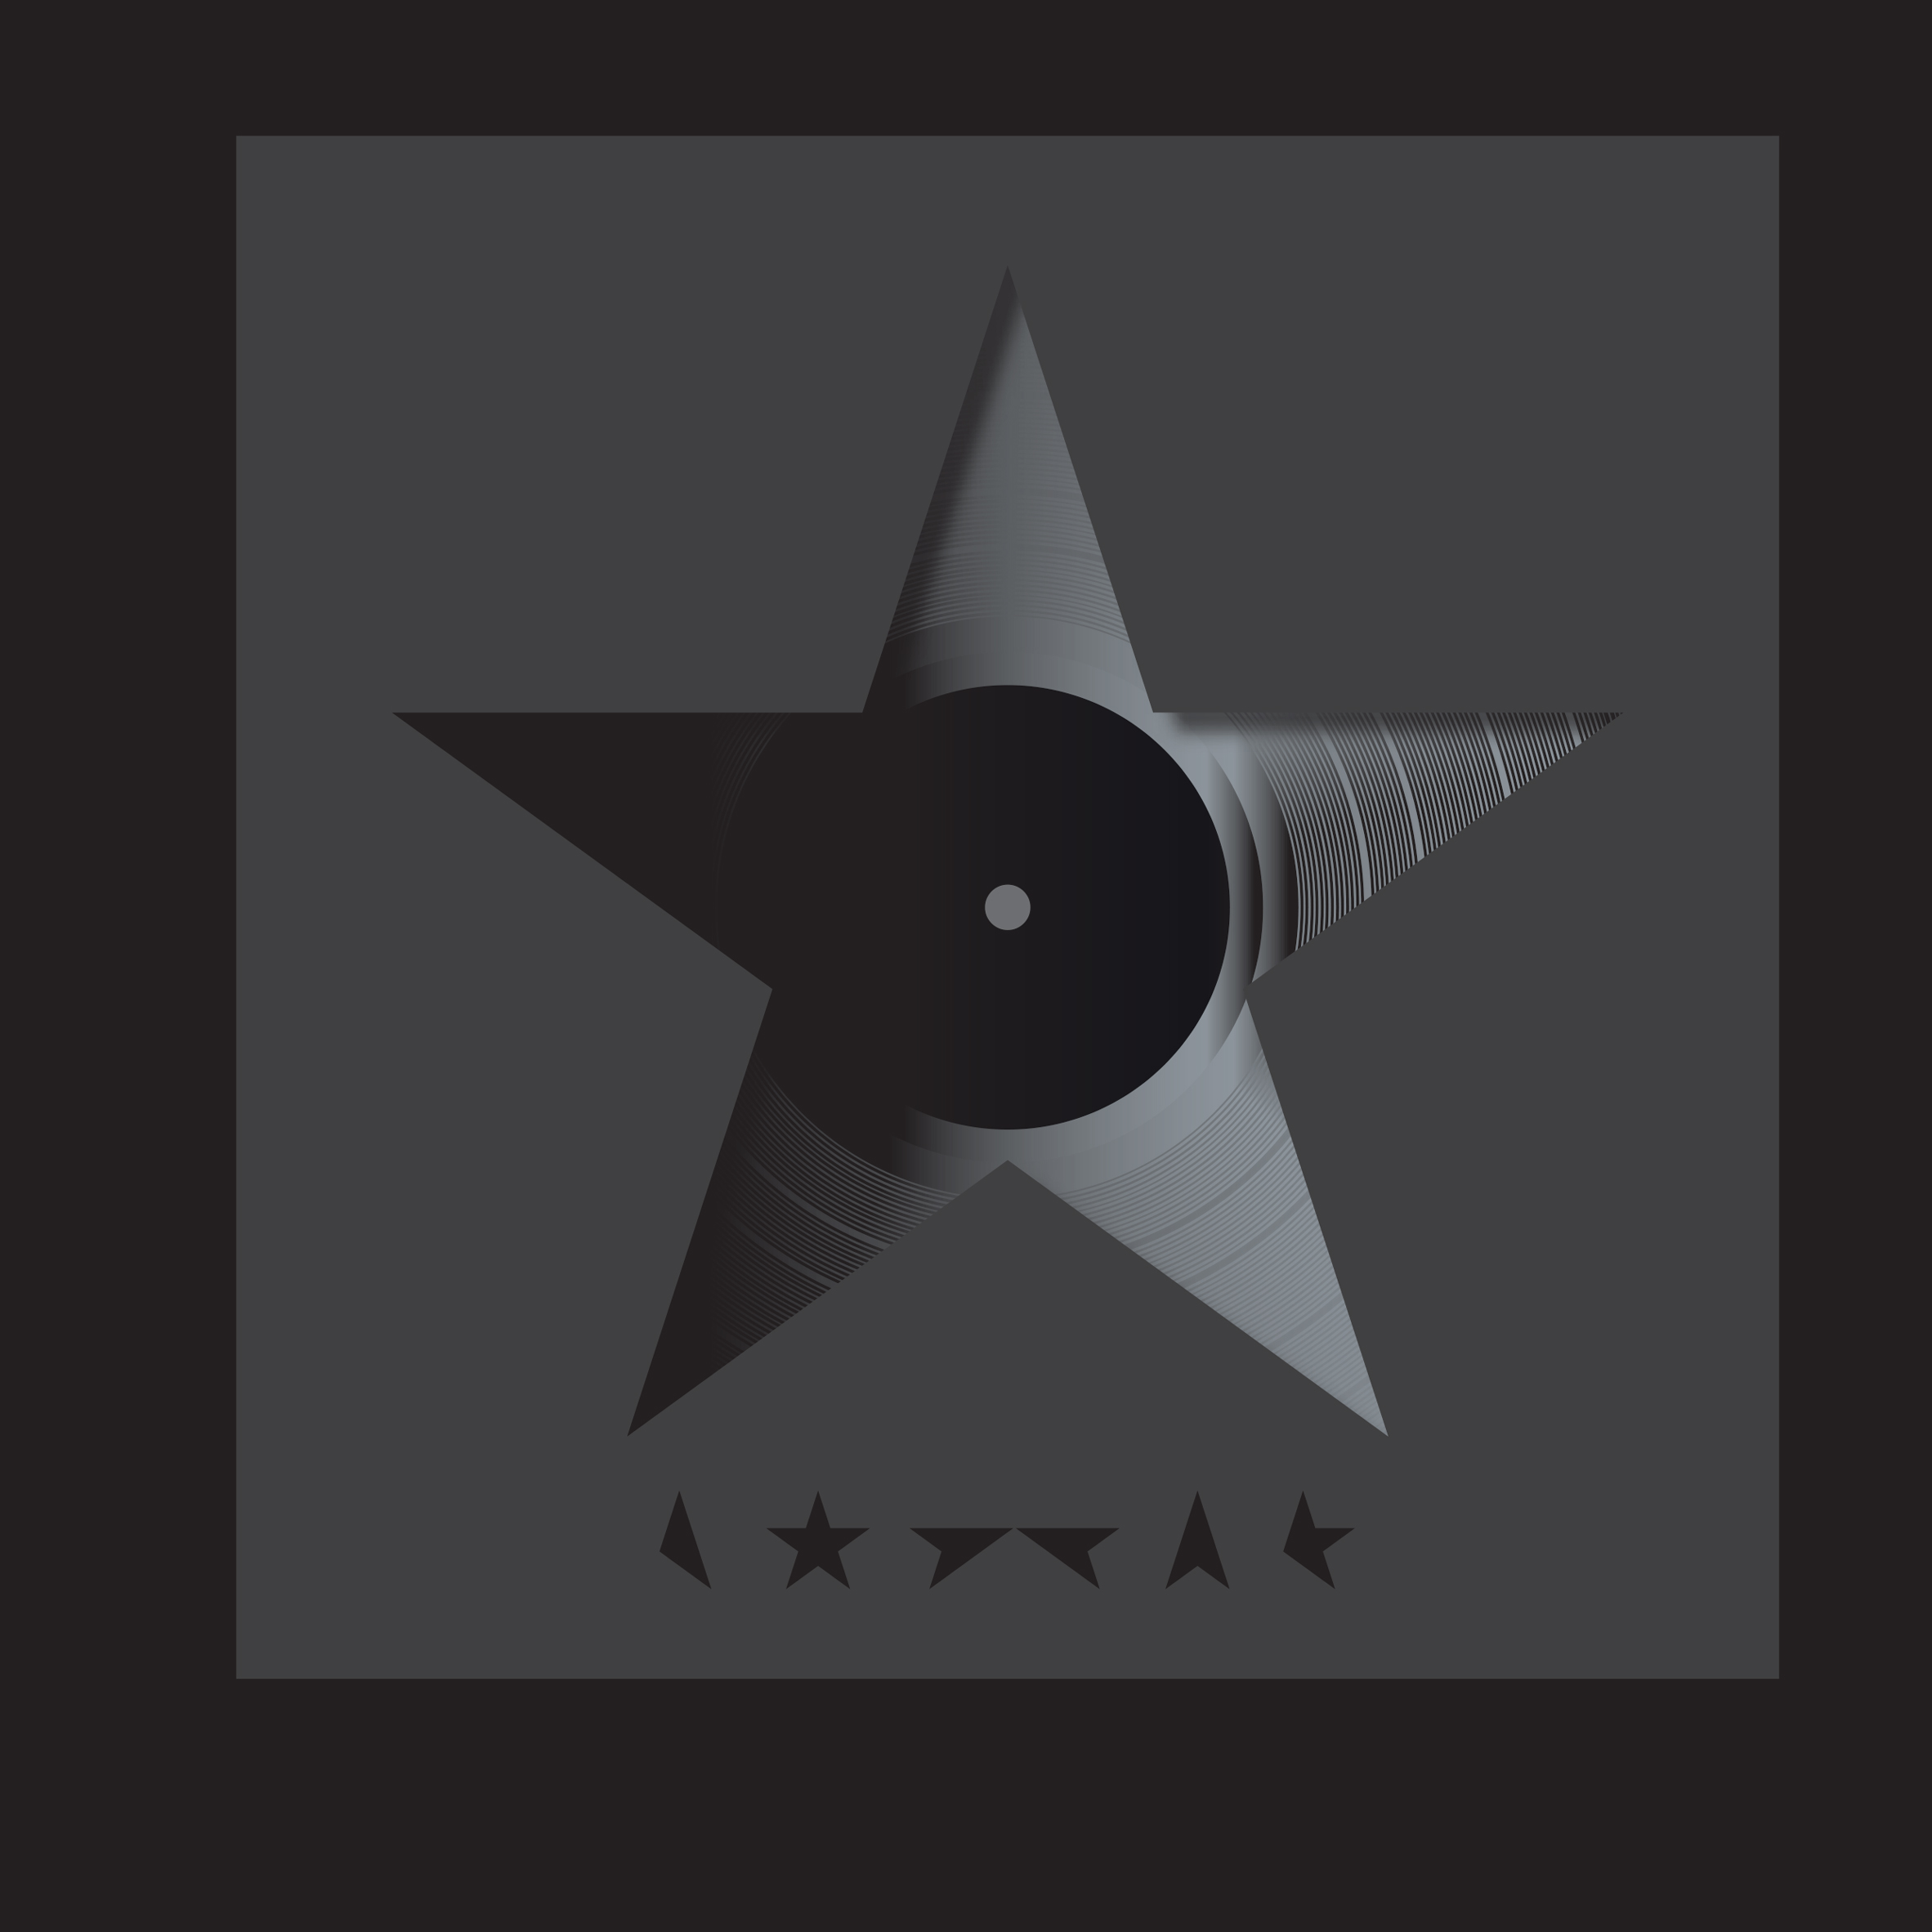 David Bowie's Blackstar album cover by Jonathan Barnbrook Designs of the Year 2016 nominee